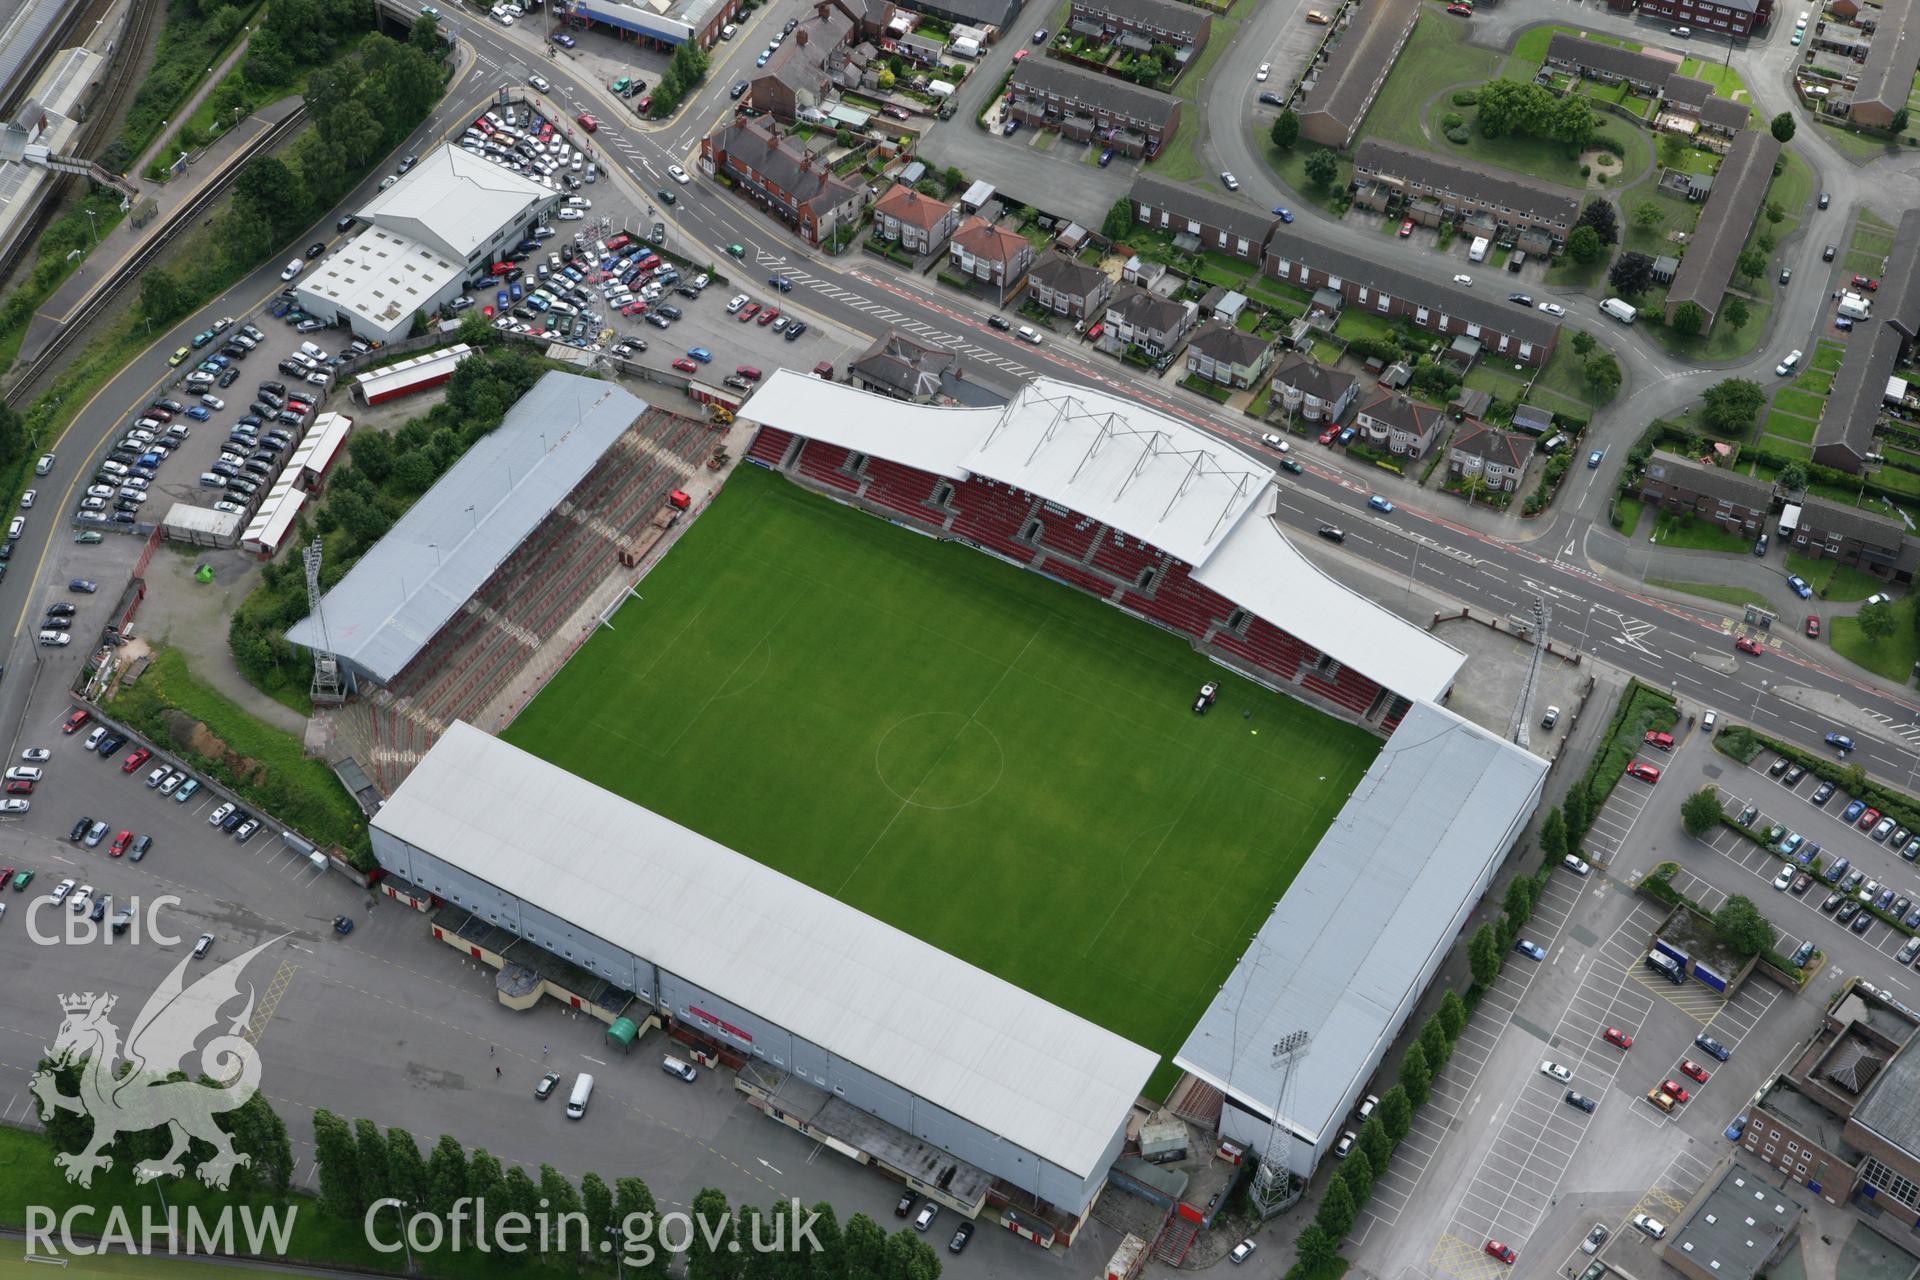 RCAHMW colour oblique aerial photograph of Wrexham, showing the football ground. Taken on 24 July 2007 by Toby Driver